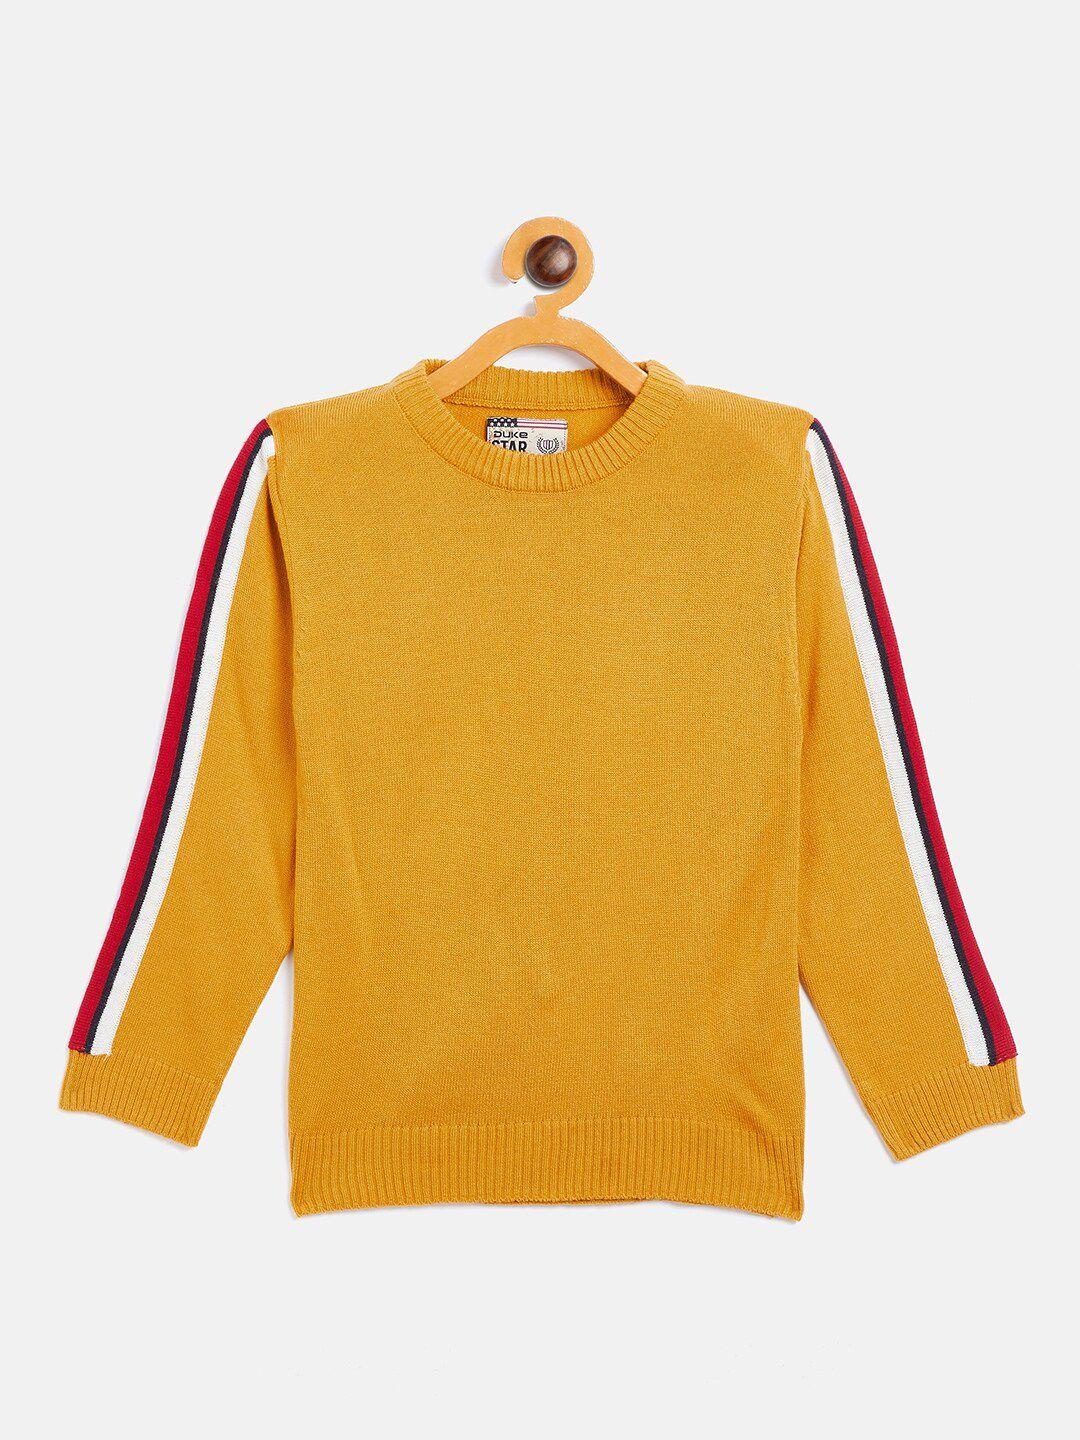 duke boys yellow & red pullover sweater